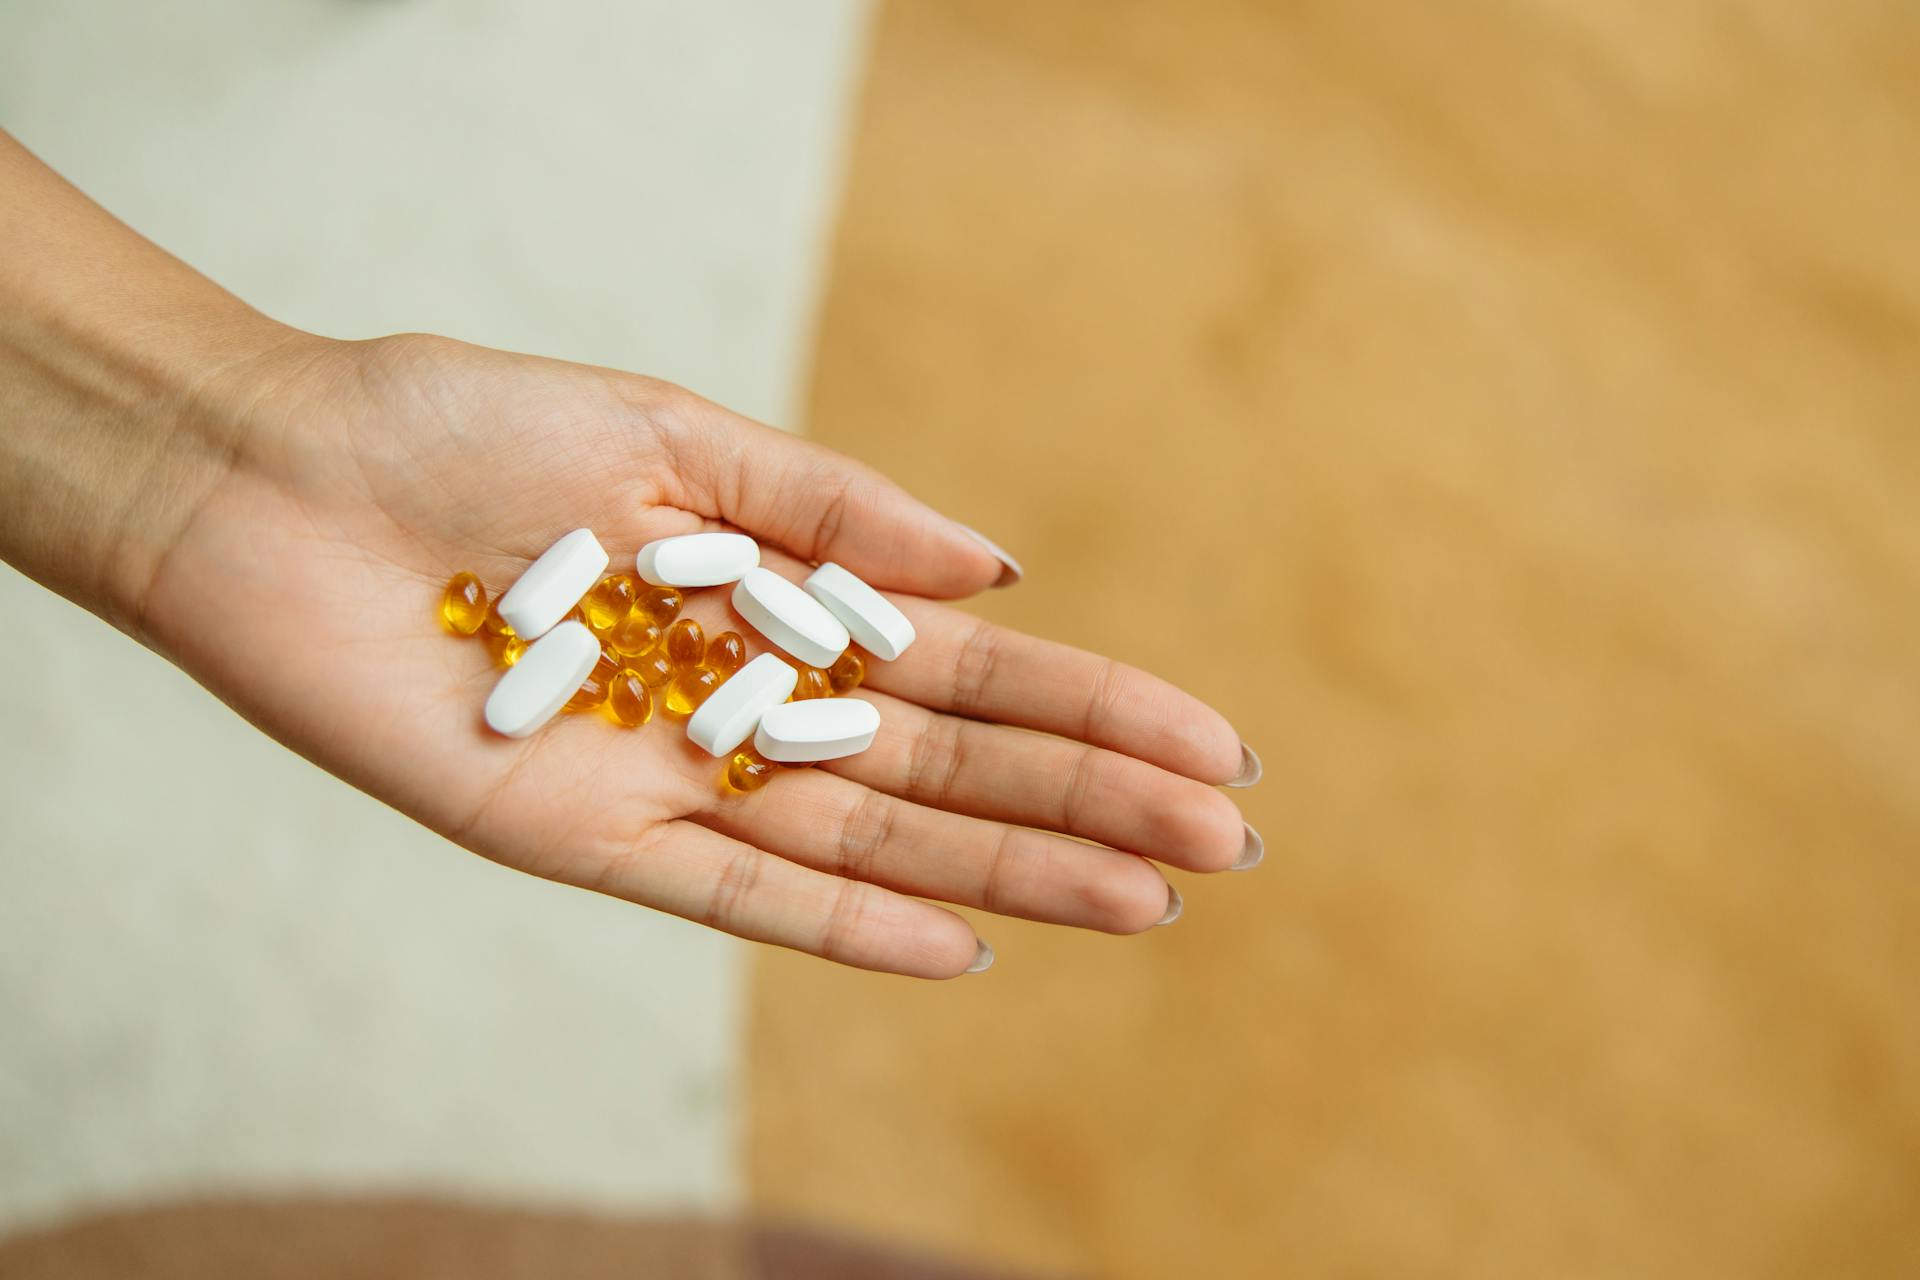 A person holding pills. For illustration purposes only | Source: Pexels